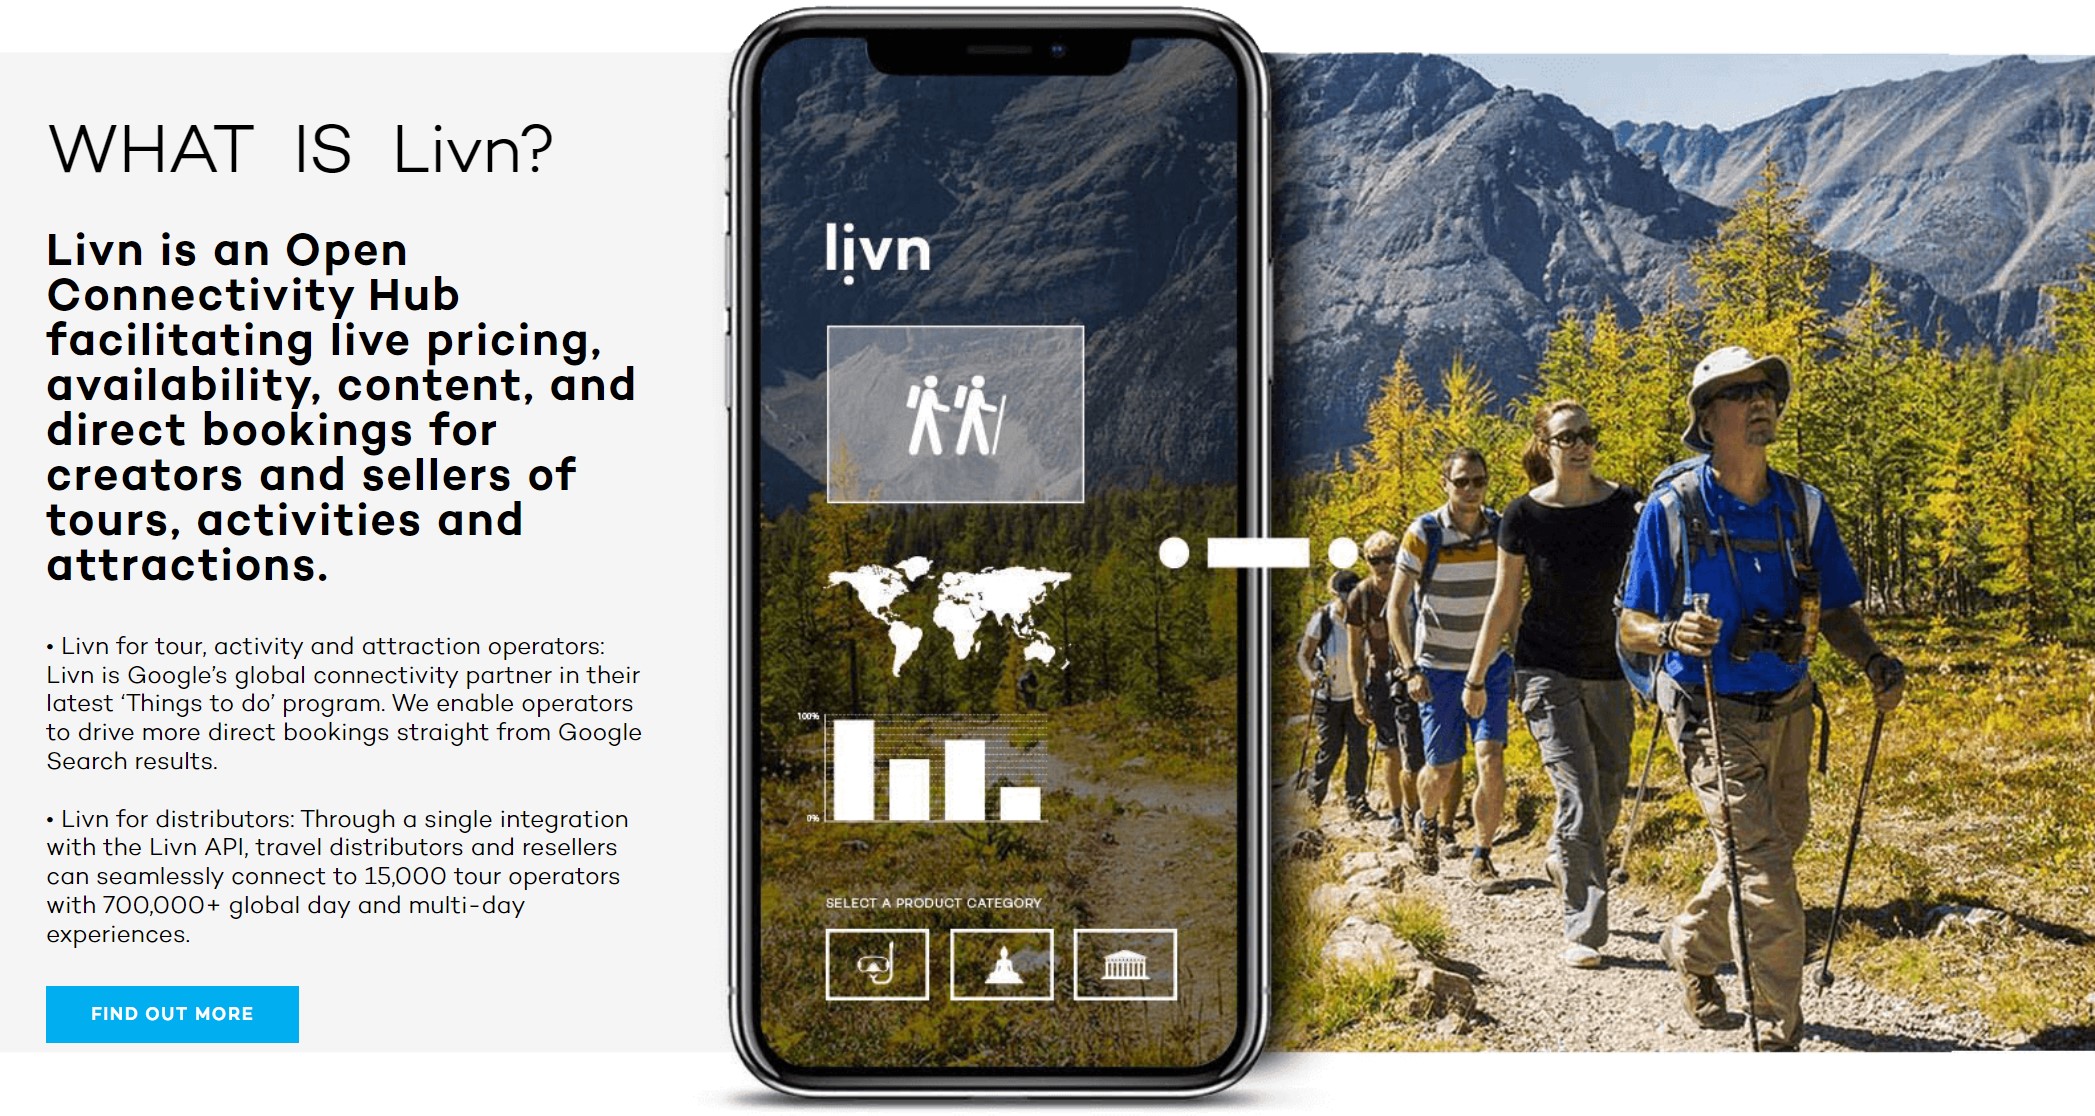 How to connect my booking system with Livn for live availability.